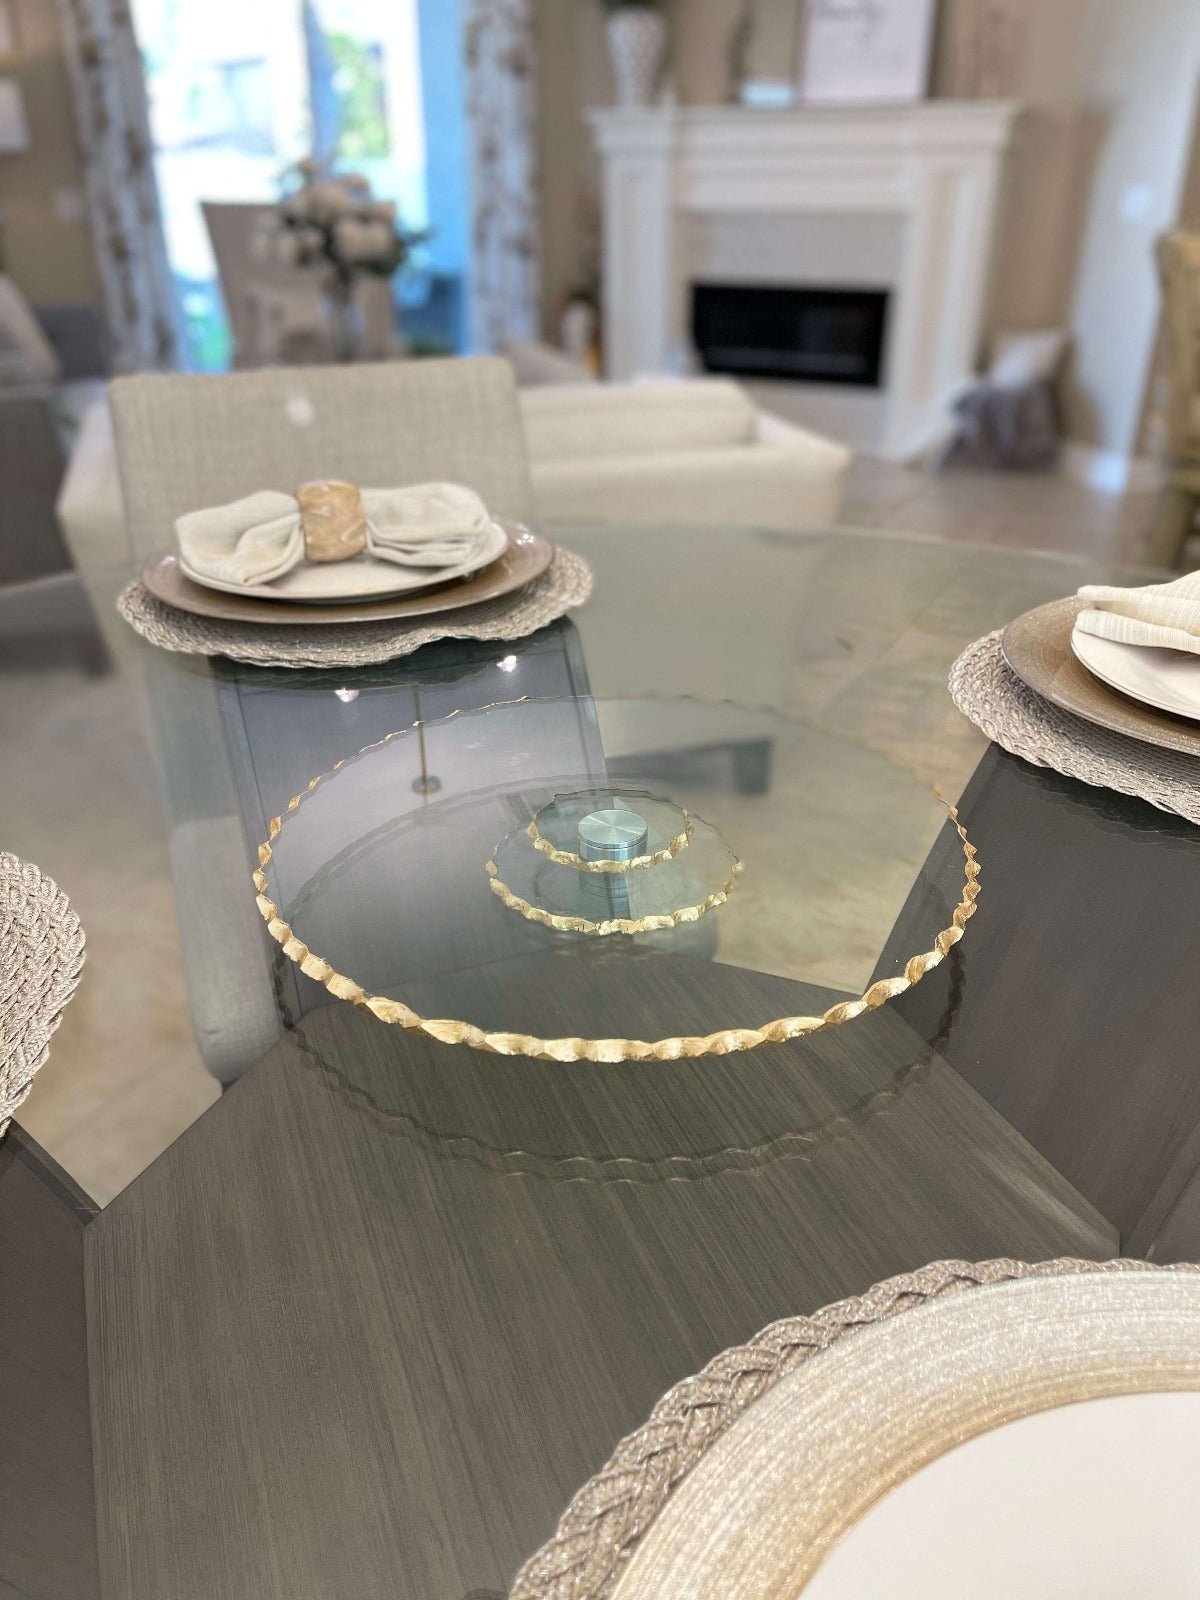 13.25D Lazy Susan Rotating Glass Cake Tray With Gold Edges displayed on table.